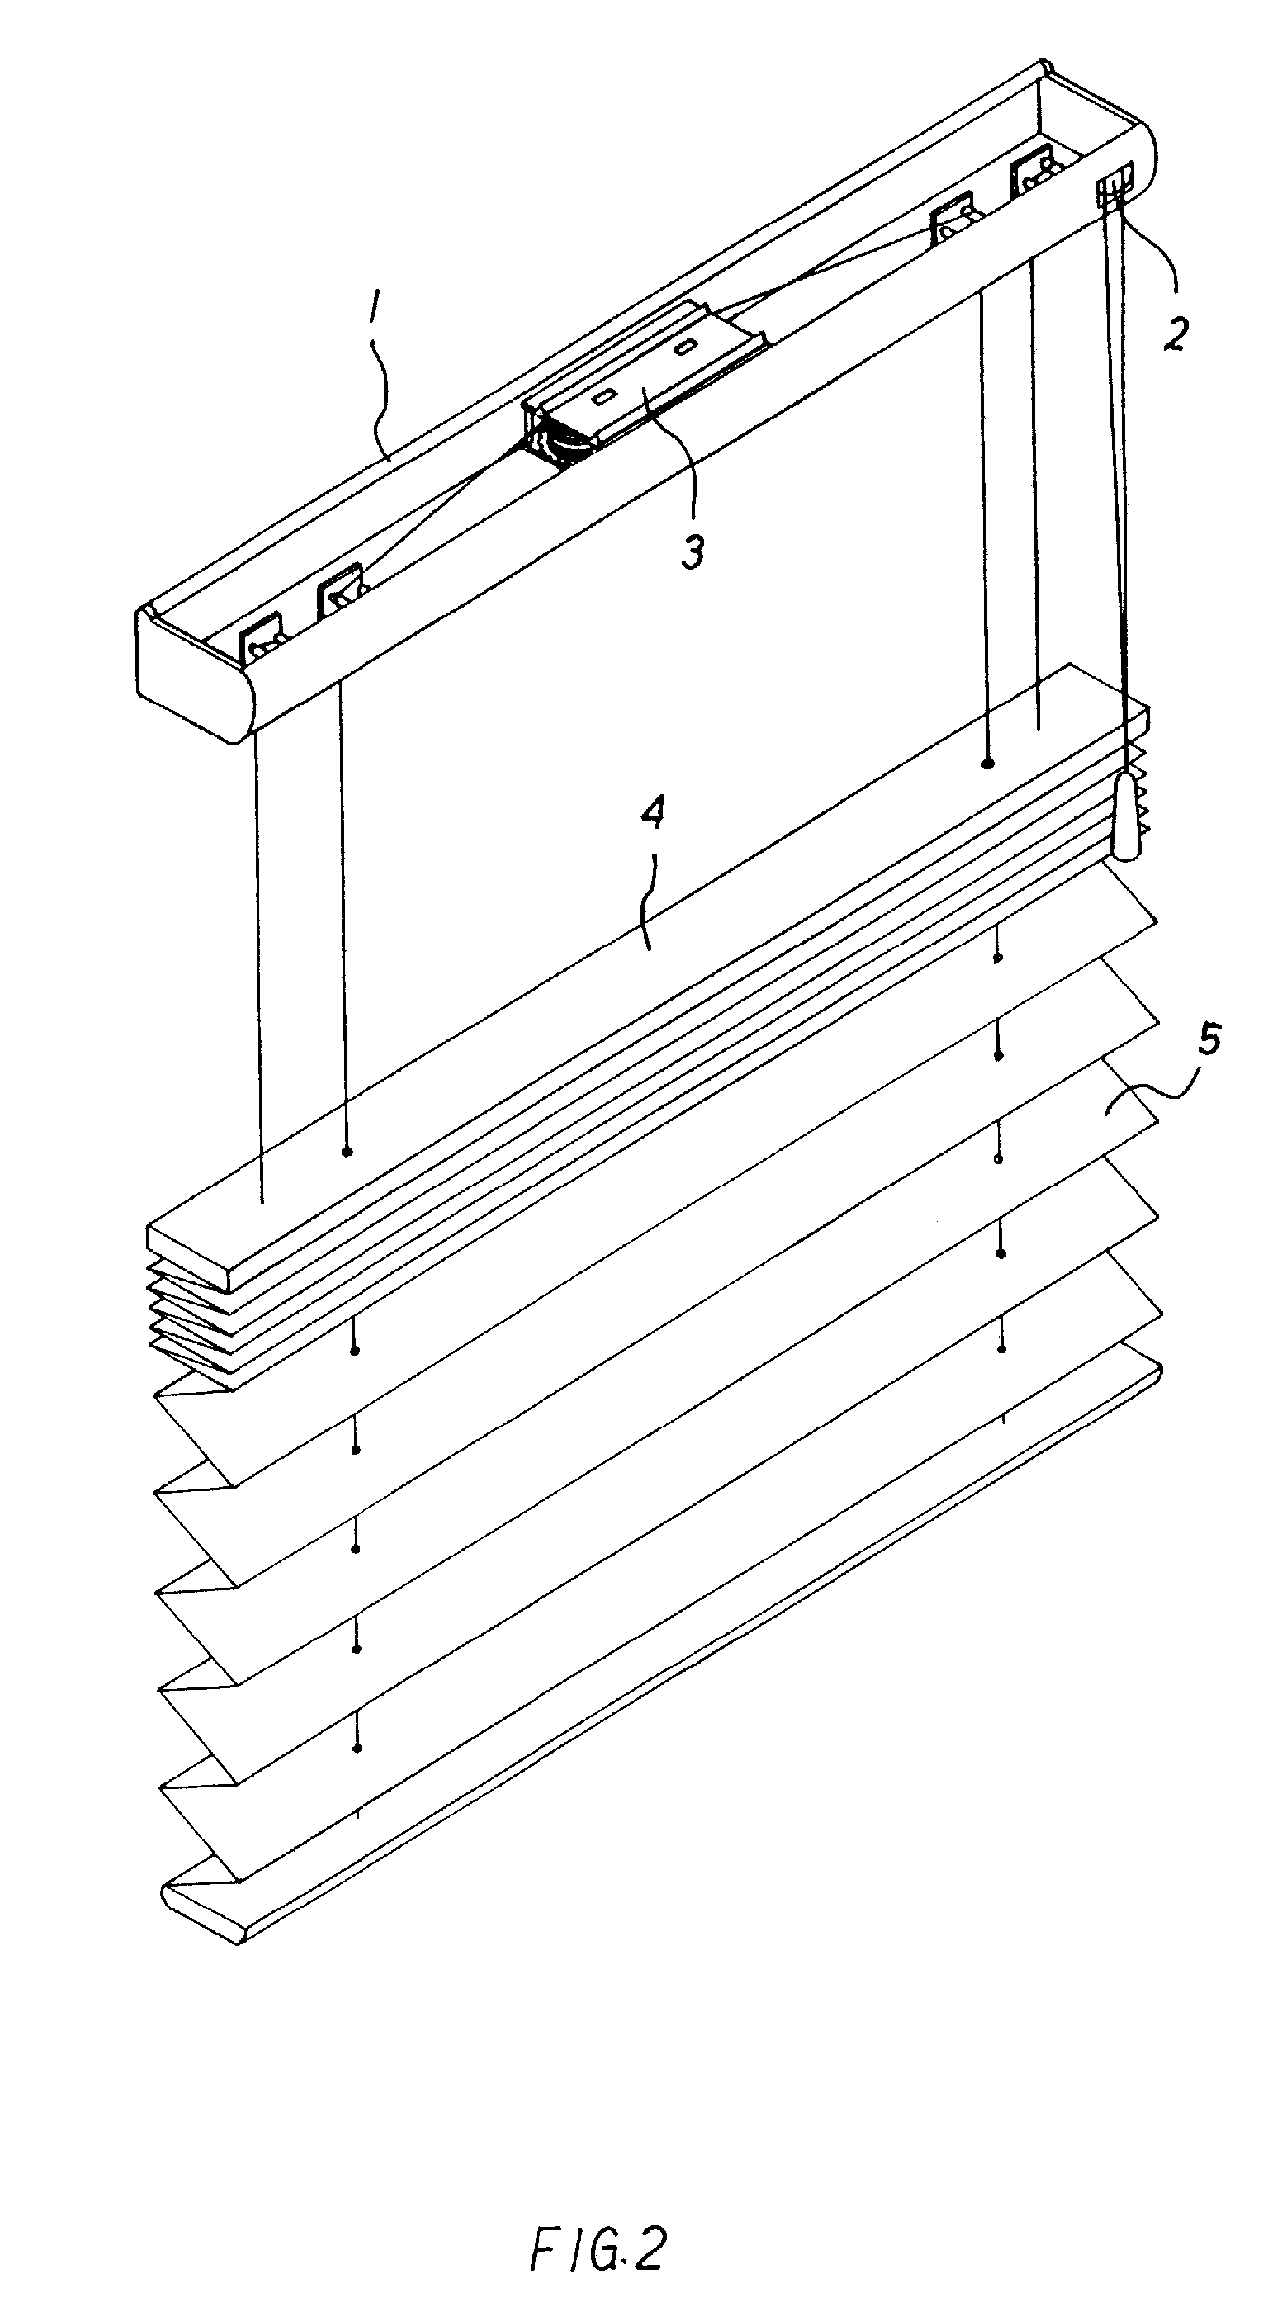 Curtain device with an upper and lower section thereof